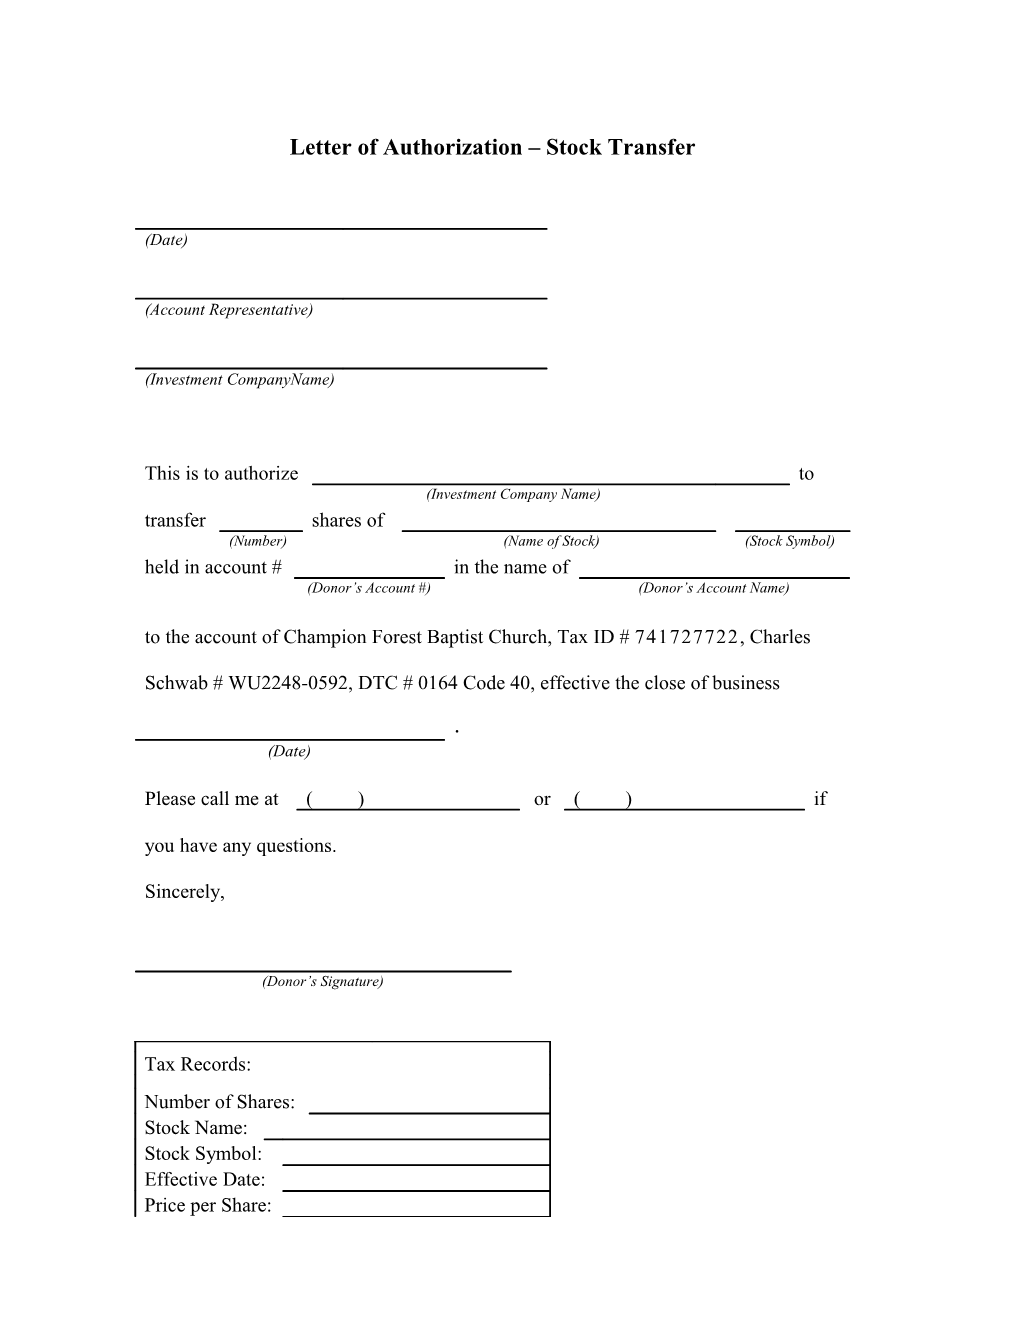 Letter of Authorization Stock Transfer